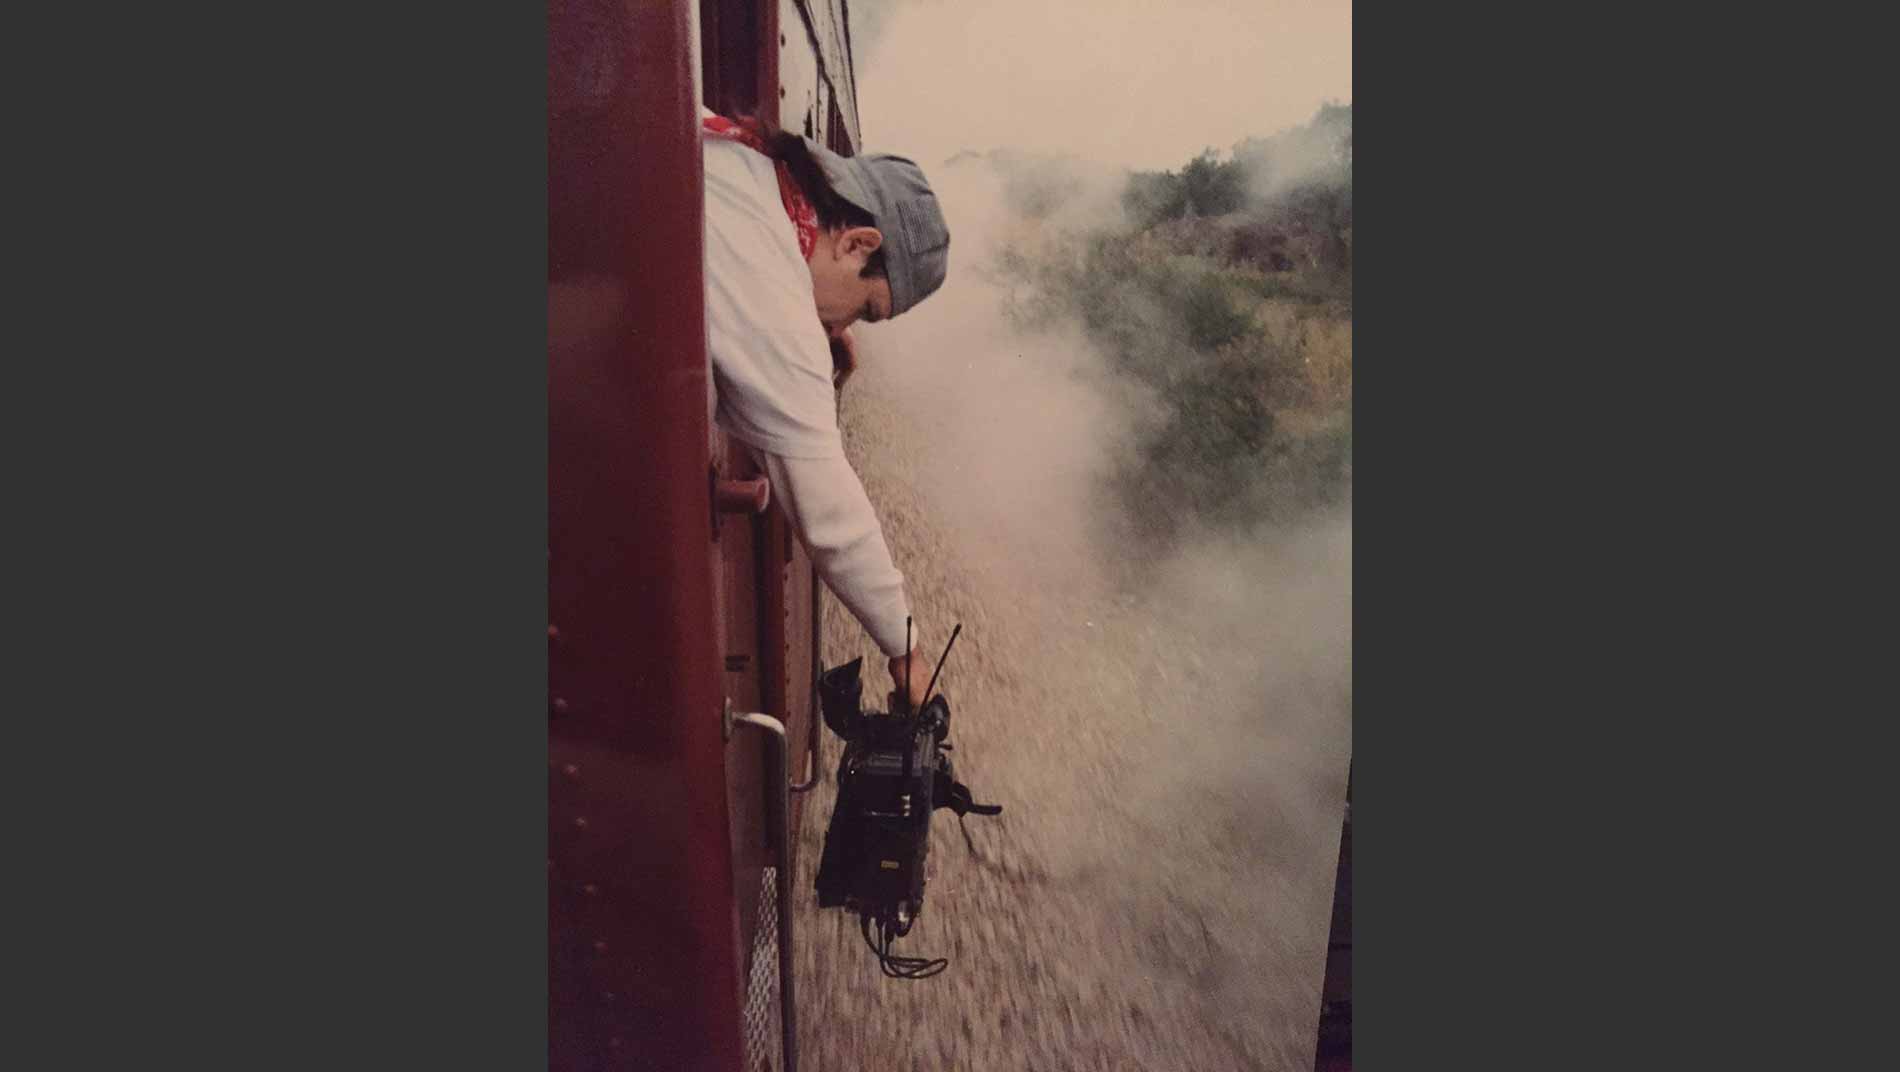 Hanging a camera out of a train isn't recommended, but Randall Maxwell was determined to get the shot.